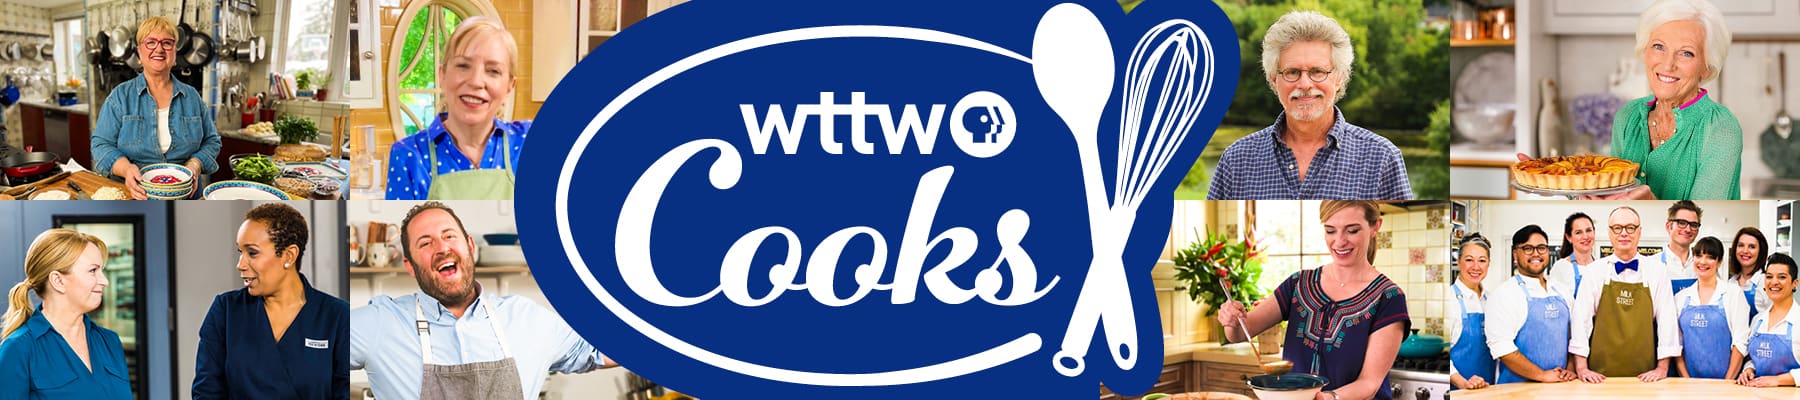 WTTW Cooking Shows